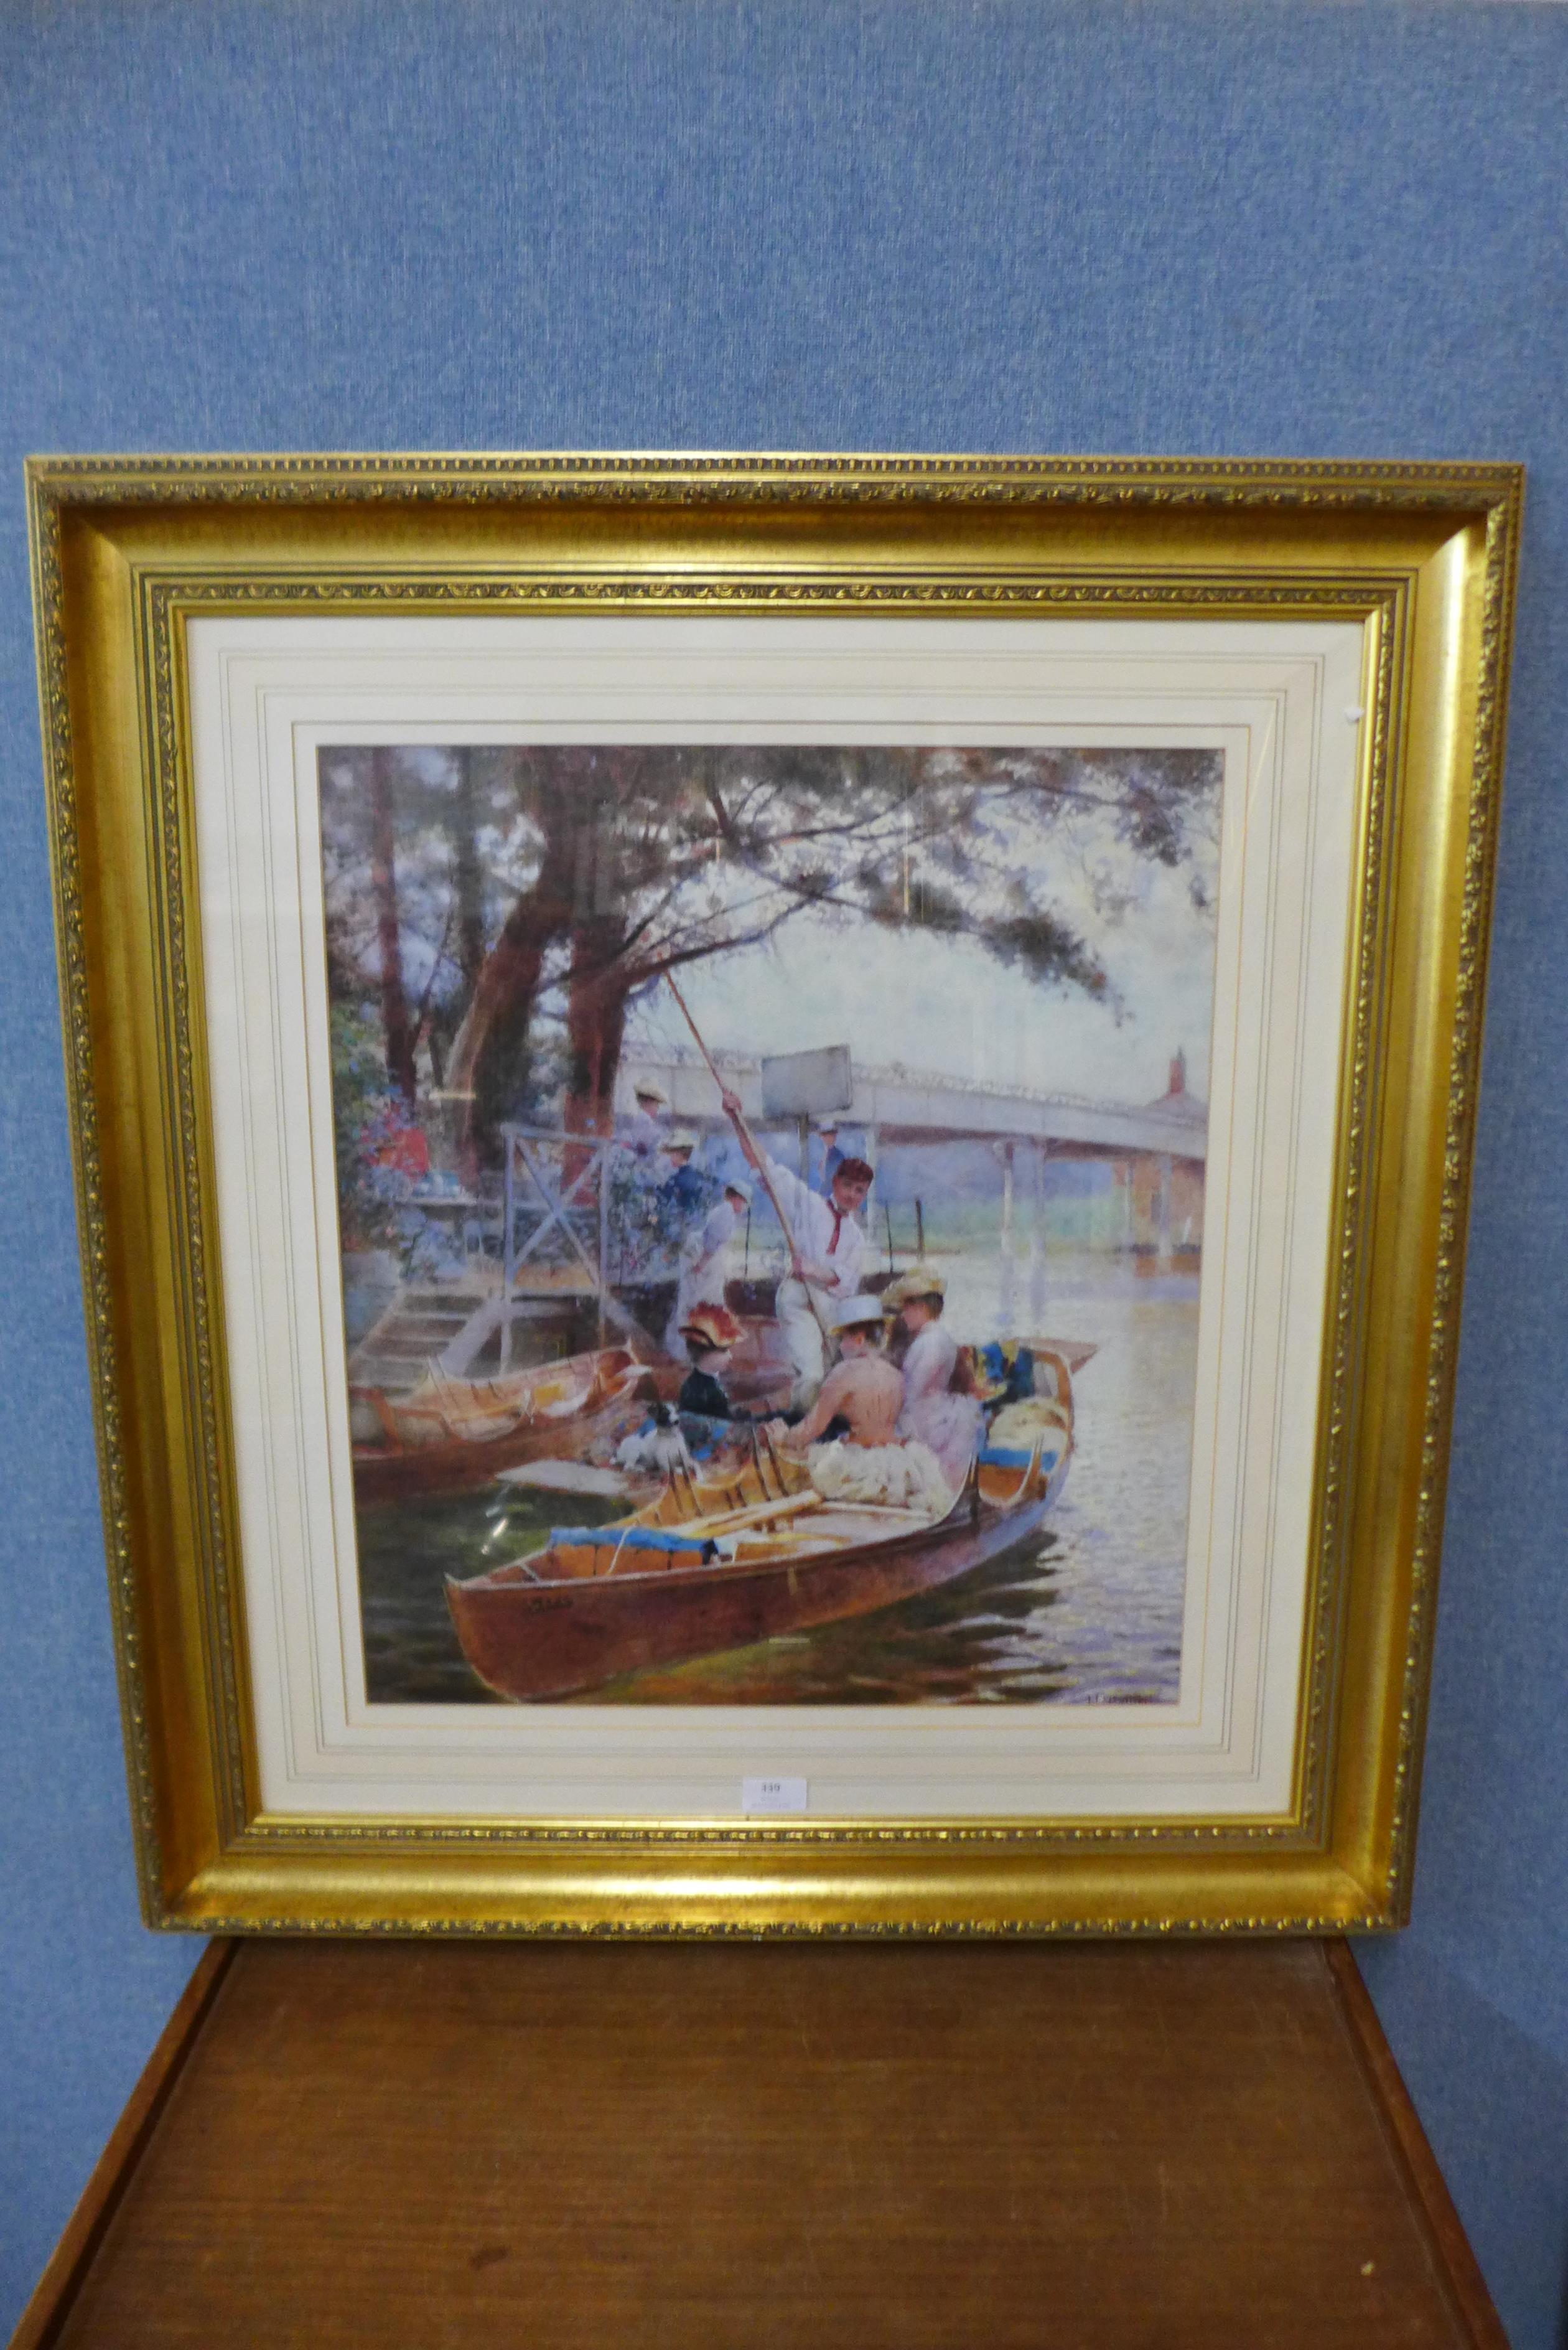 A H. Callieri print, The Boat Party, framed